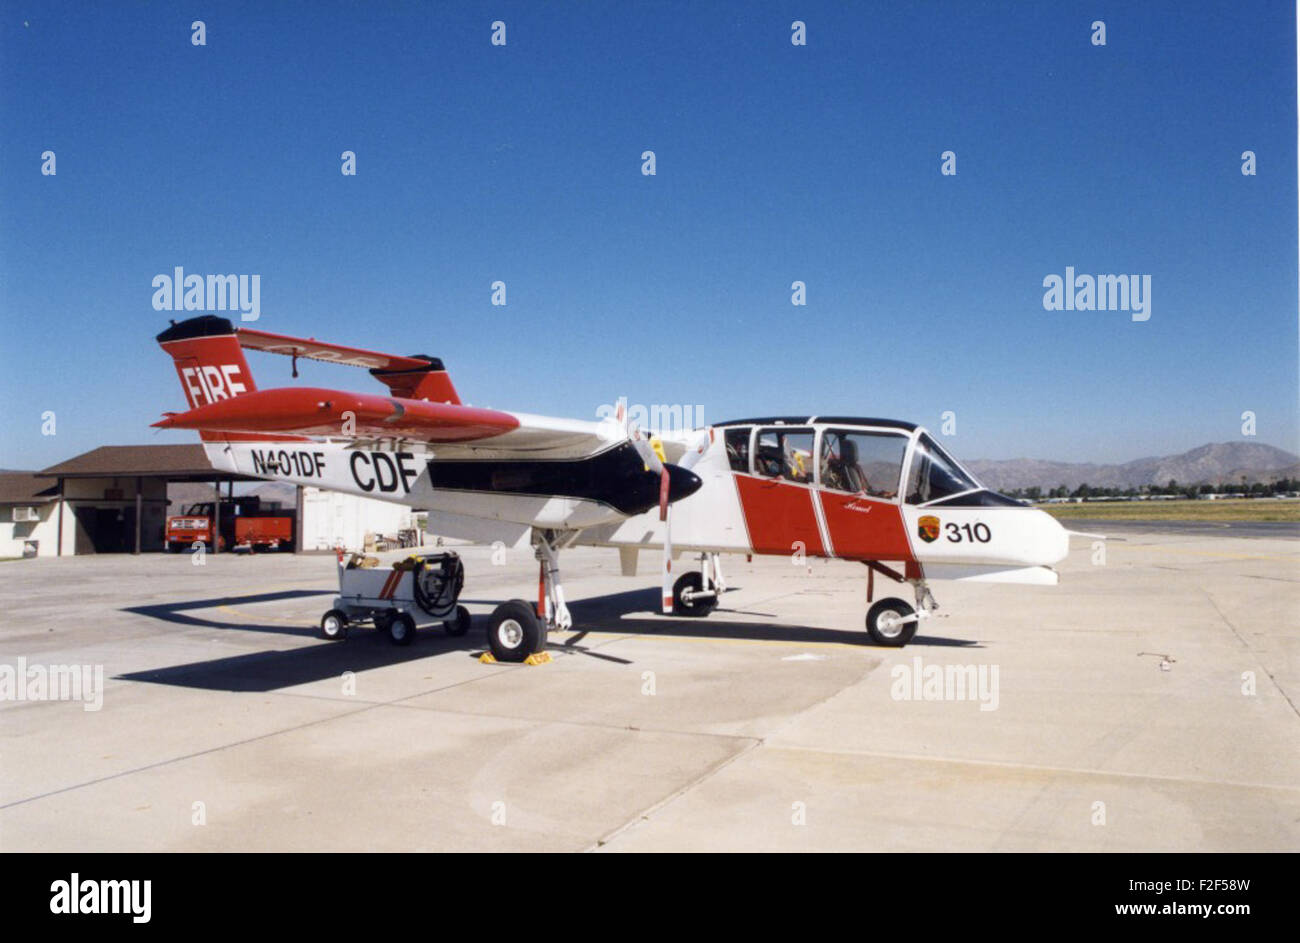 North American Rockwell OV-10 Bronco '', 155457, cn 305-120M-66 (N401DF) Banque D'Images